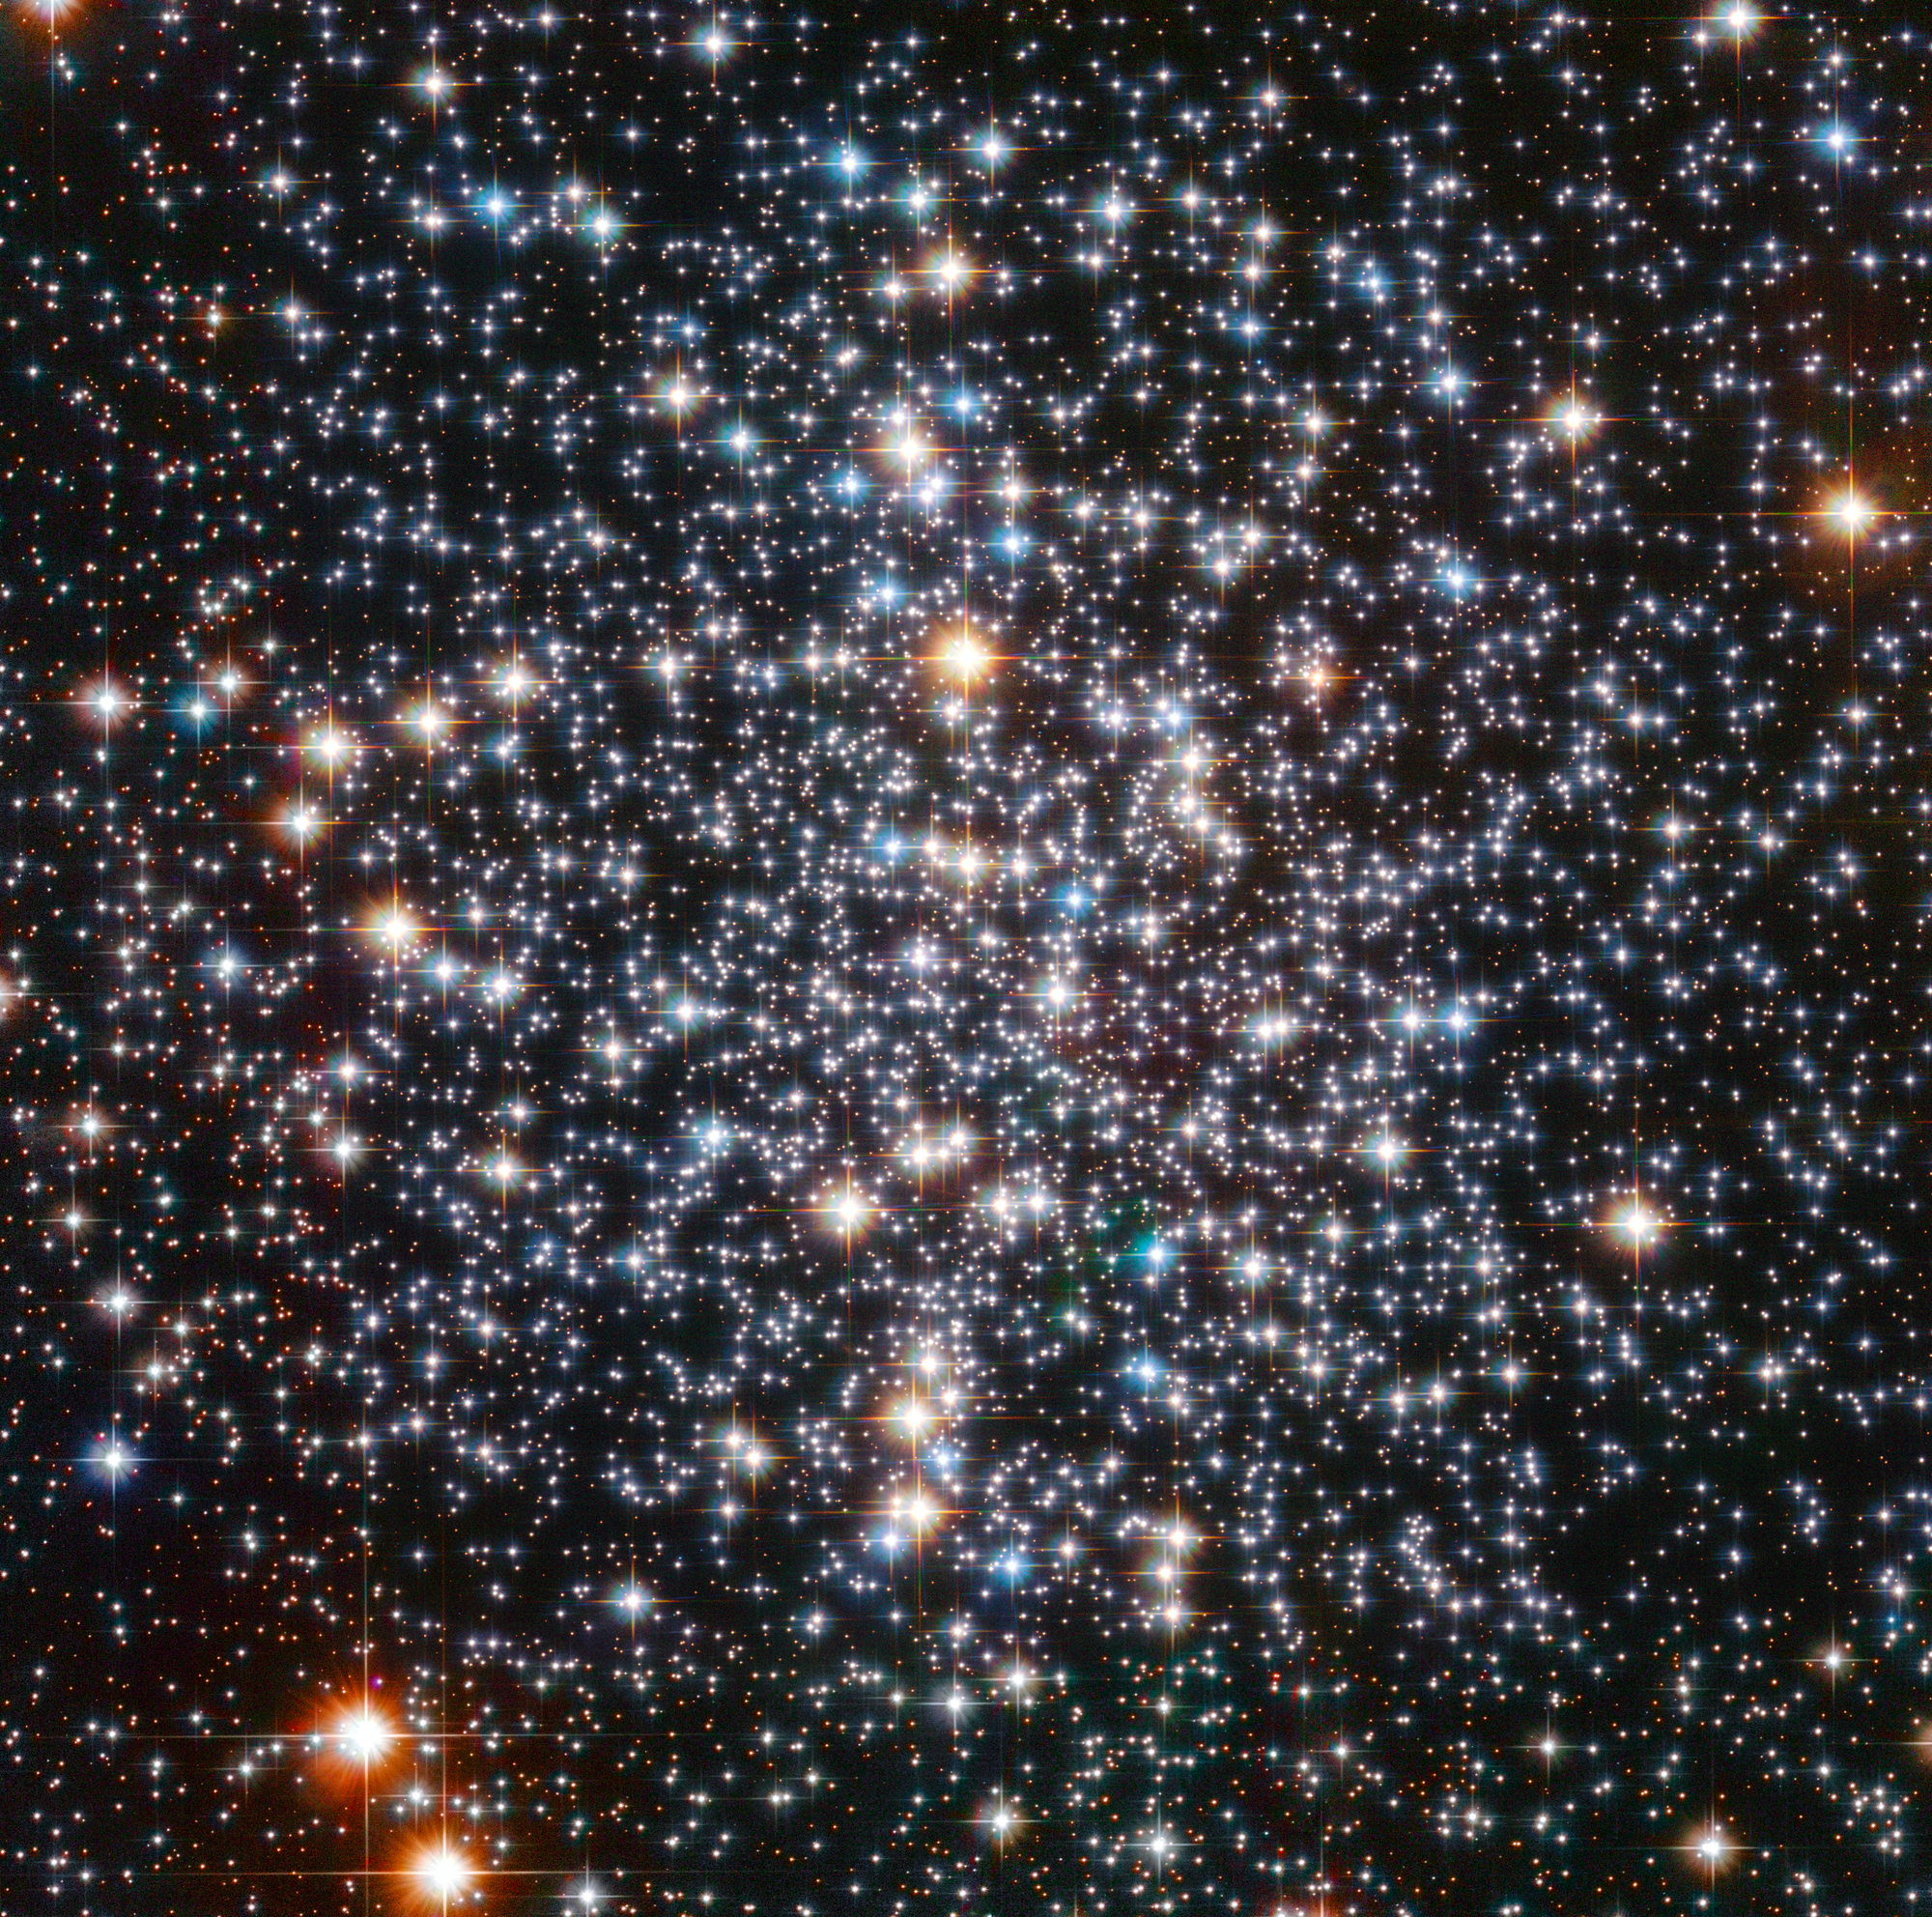 The field is filled with stars against a black background. Stars are more dense at image center and taper off toward the edges. Star colors are mainly white and blue-white with a smattering of large, orangish stars.